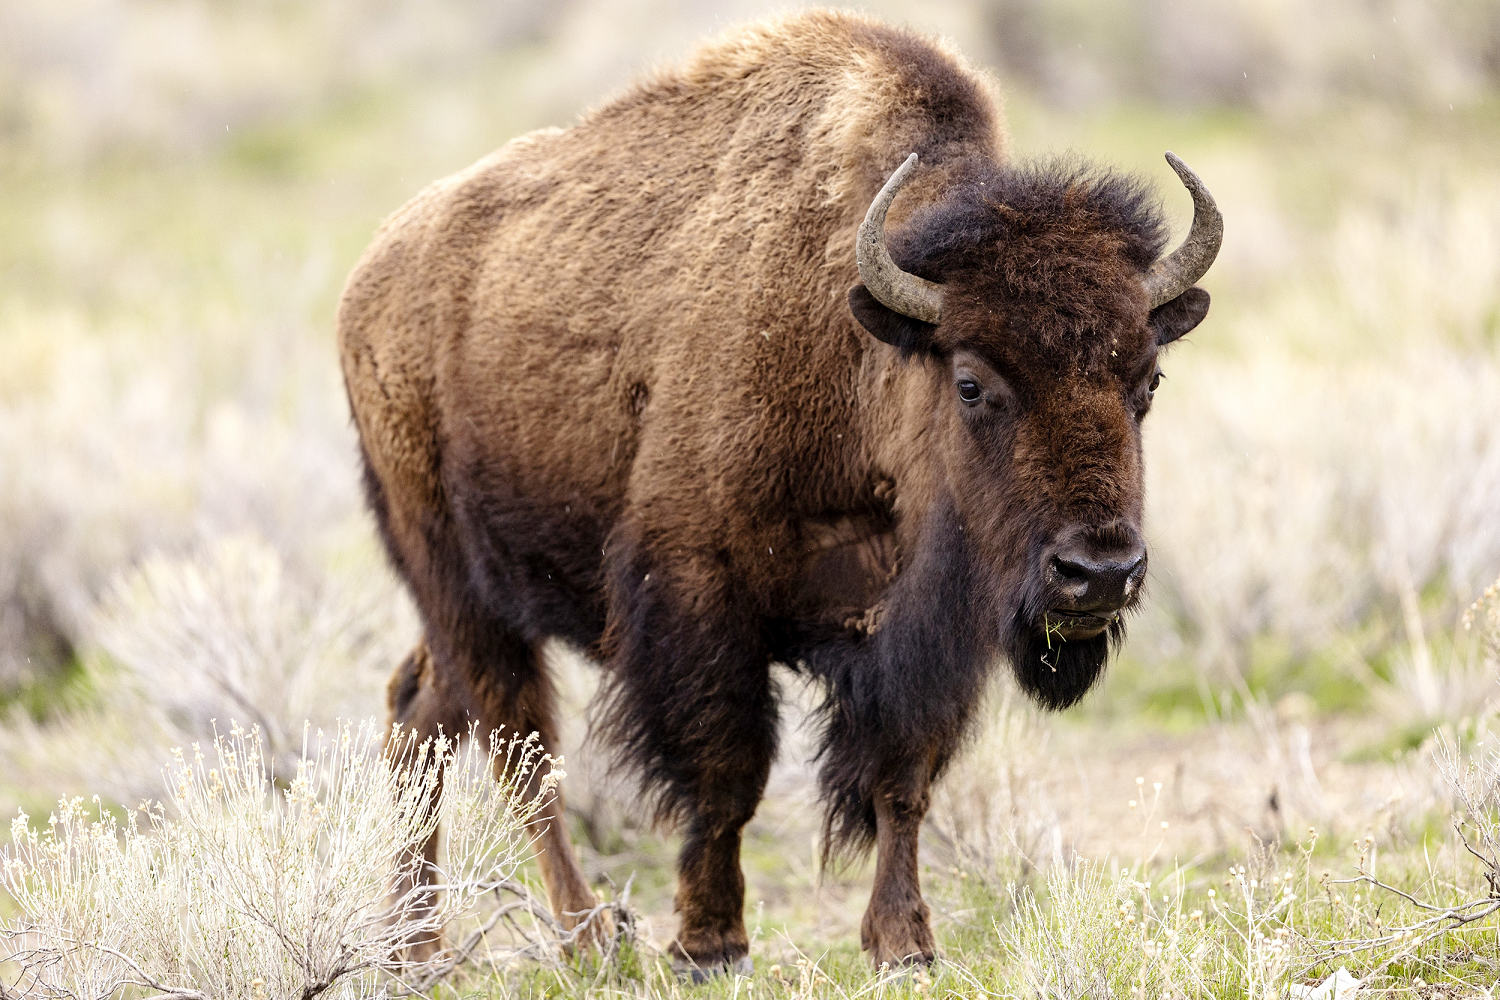 Man accused of kicking bison at Yellowstone is arrested on alcohol charge